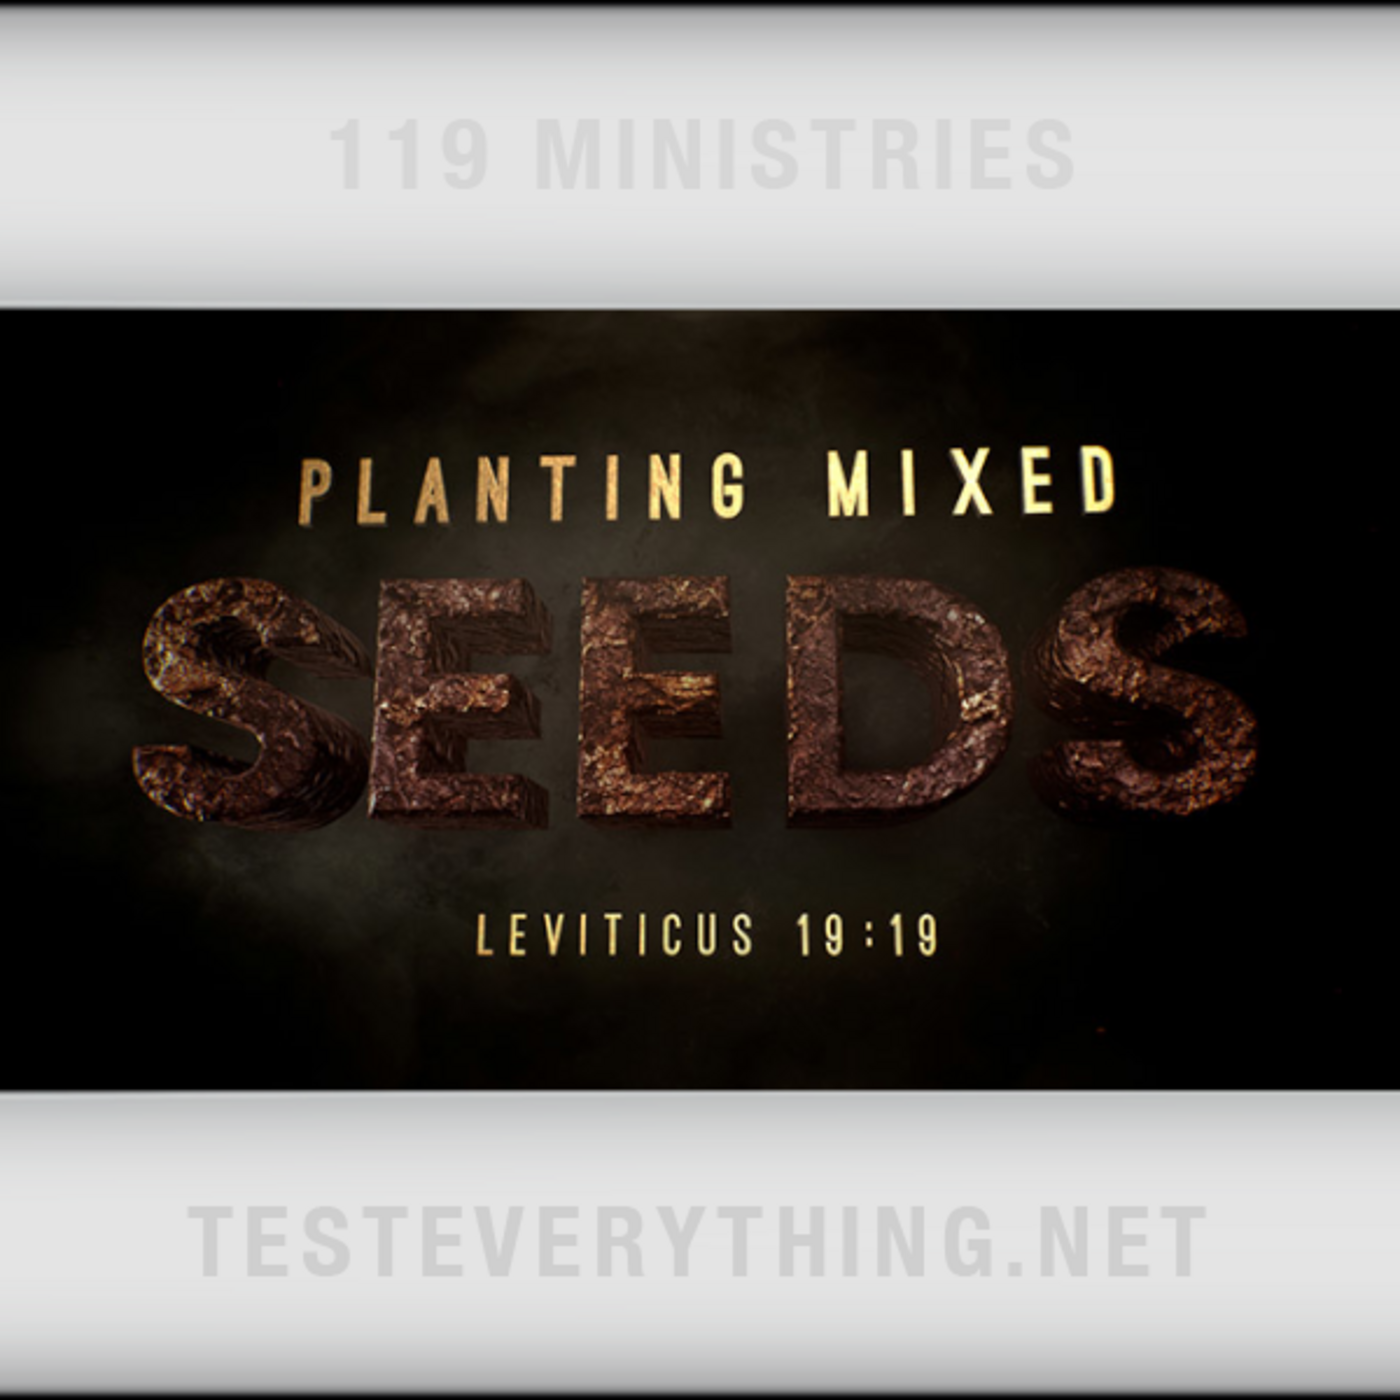 Episode 535: TE: Planting Mixed Seeds (Leviticus 19:19)